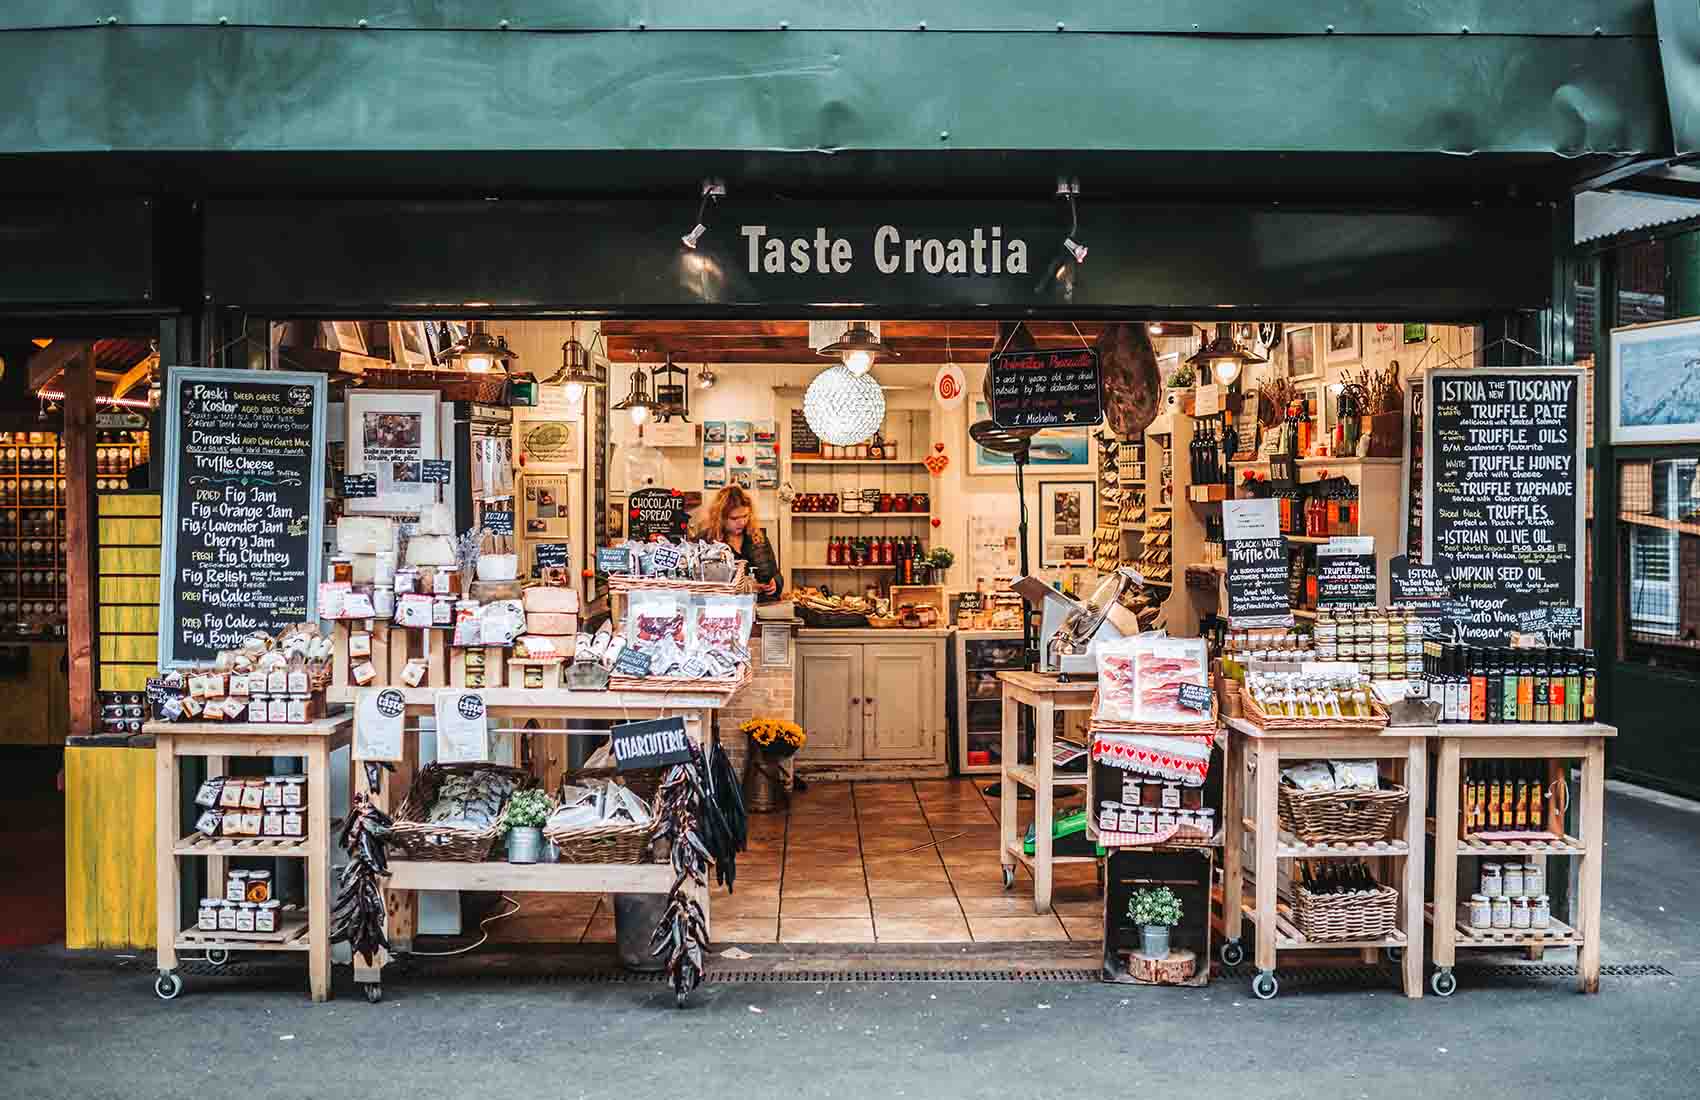 Experience culture and shopping at the best markets in London. From Borough Market to Camden Market, you'll find everything from vintage clothing to fresh produce.